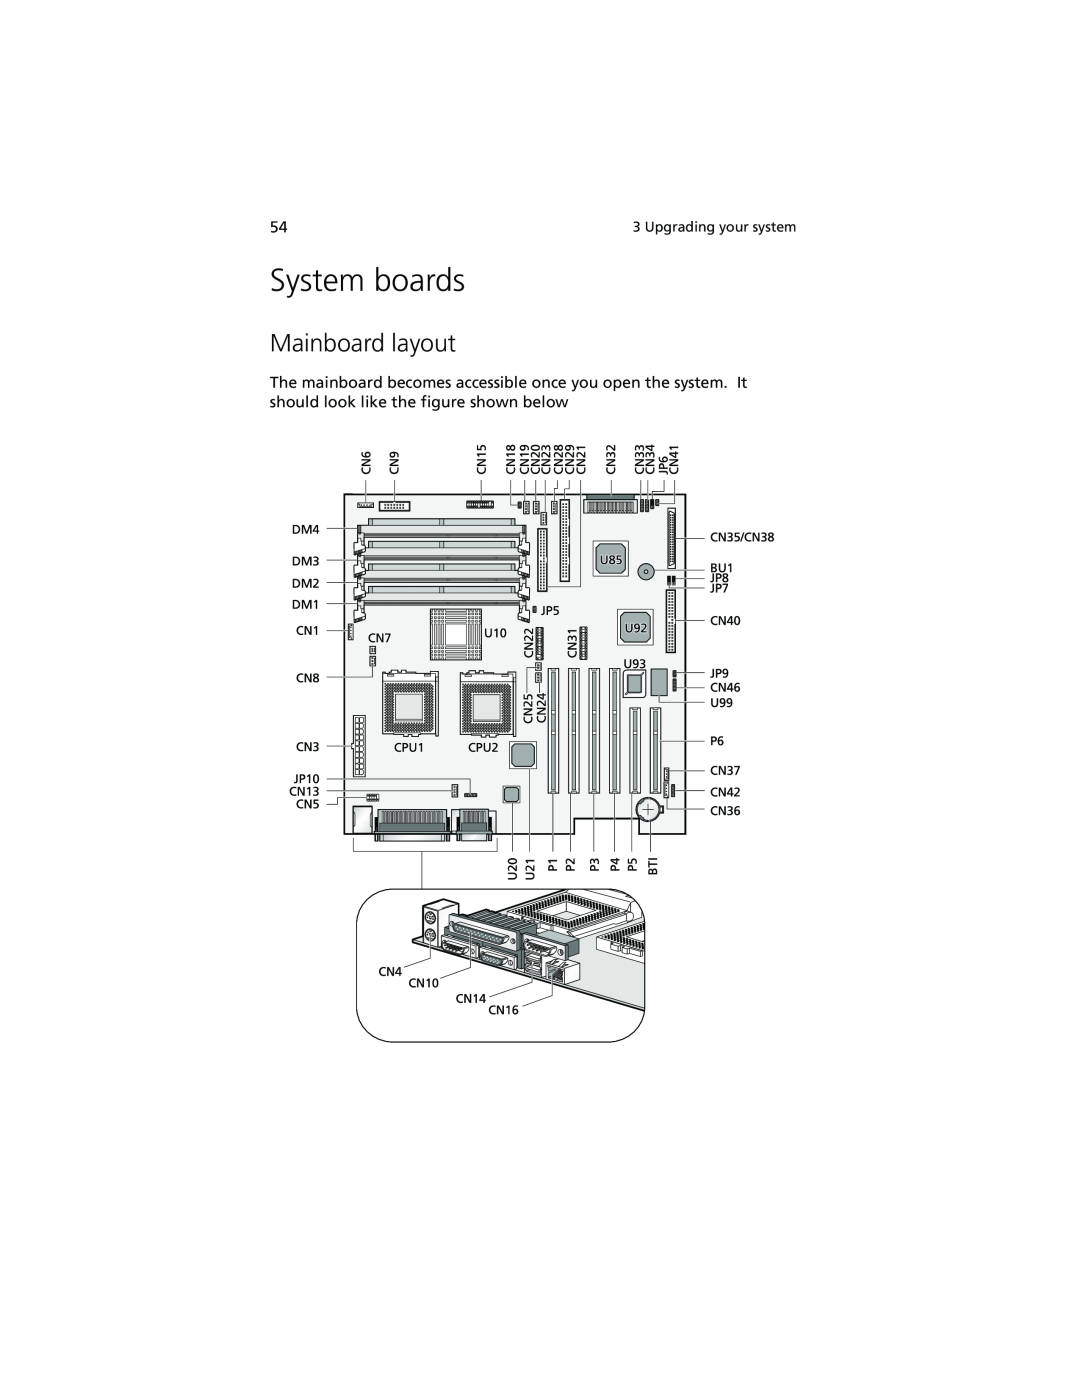 Acer Altos G610 manual System boards, Mainboard layout 